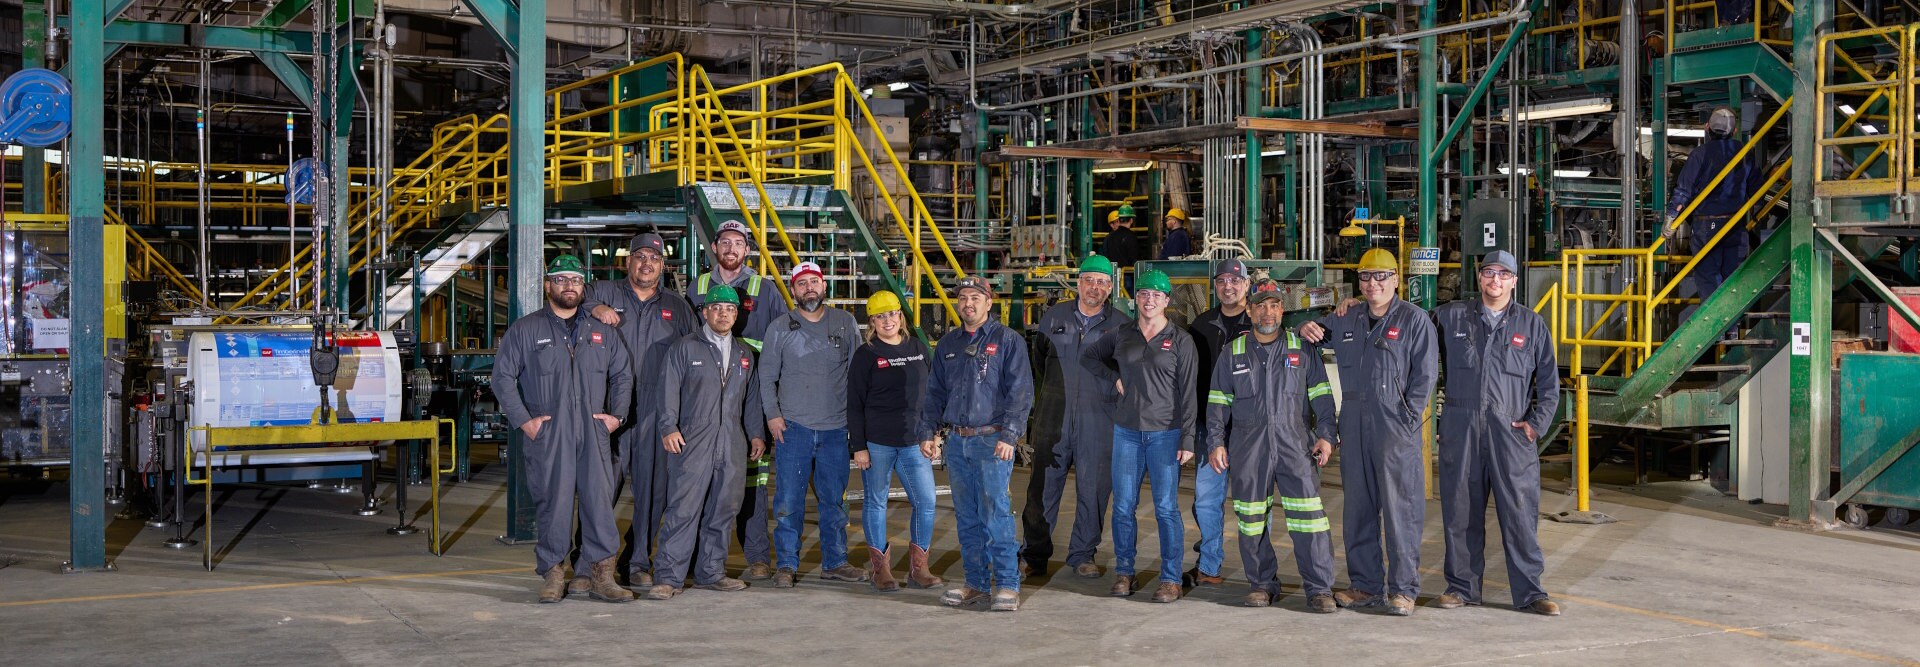 GAF employees at roofing manufacturing plant